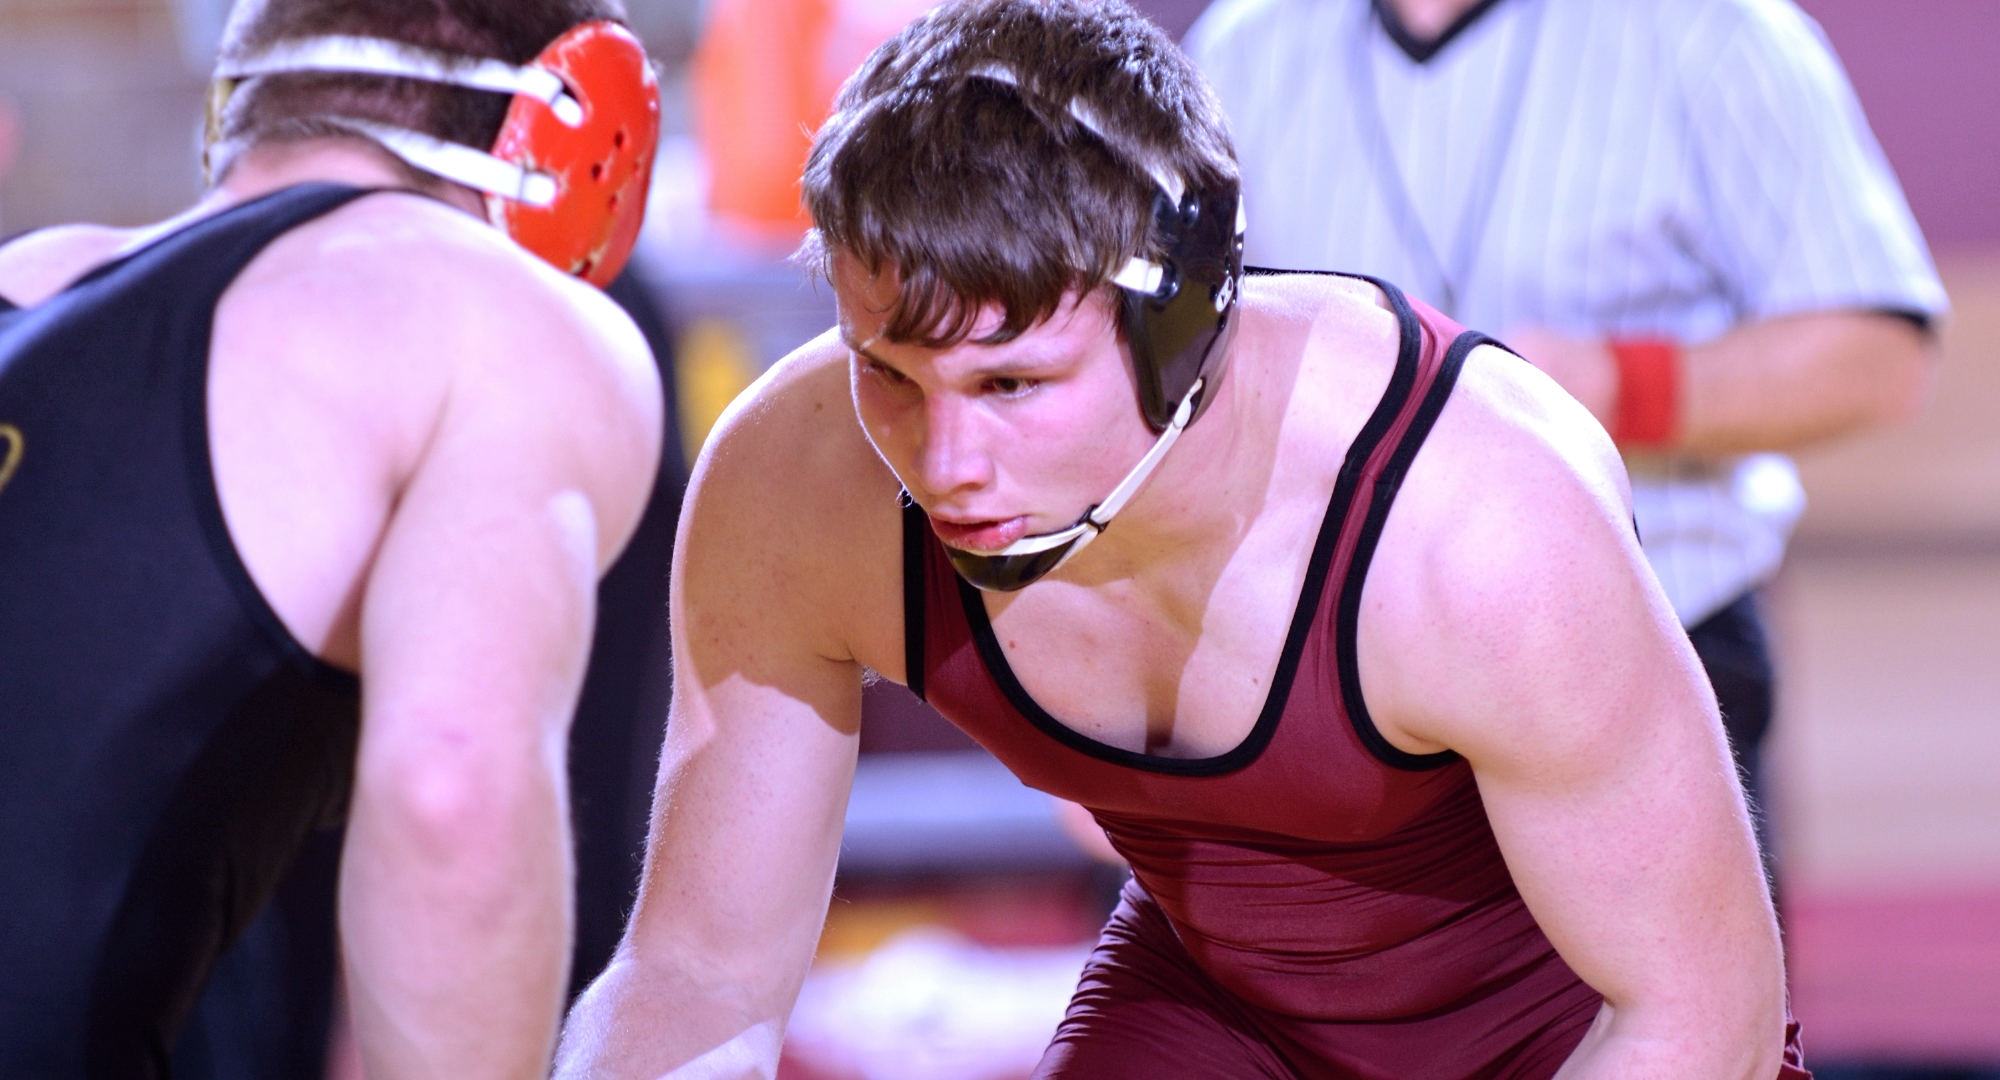 Junior Jake Johnson was one of five Cobber wrestlers to earn Top 3 finishes at the season-opening Pointer Open. Johnson went 3-1 and placed second at 174.